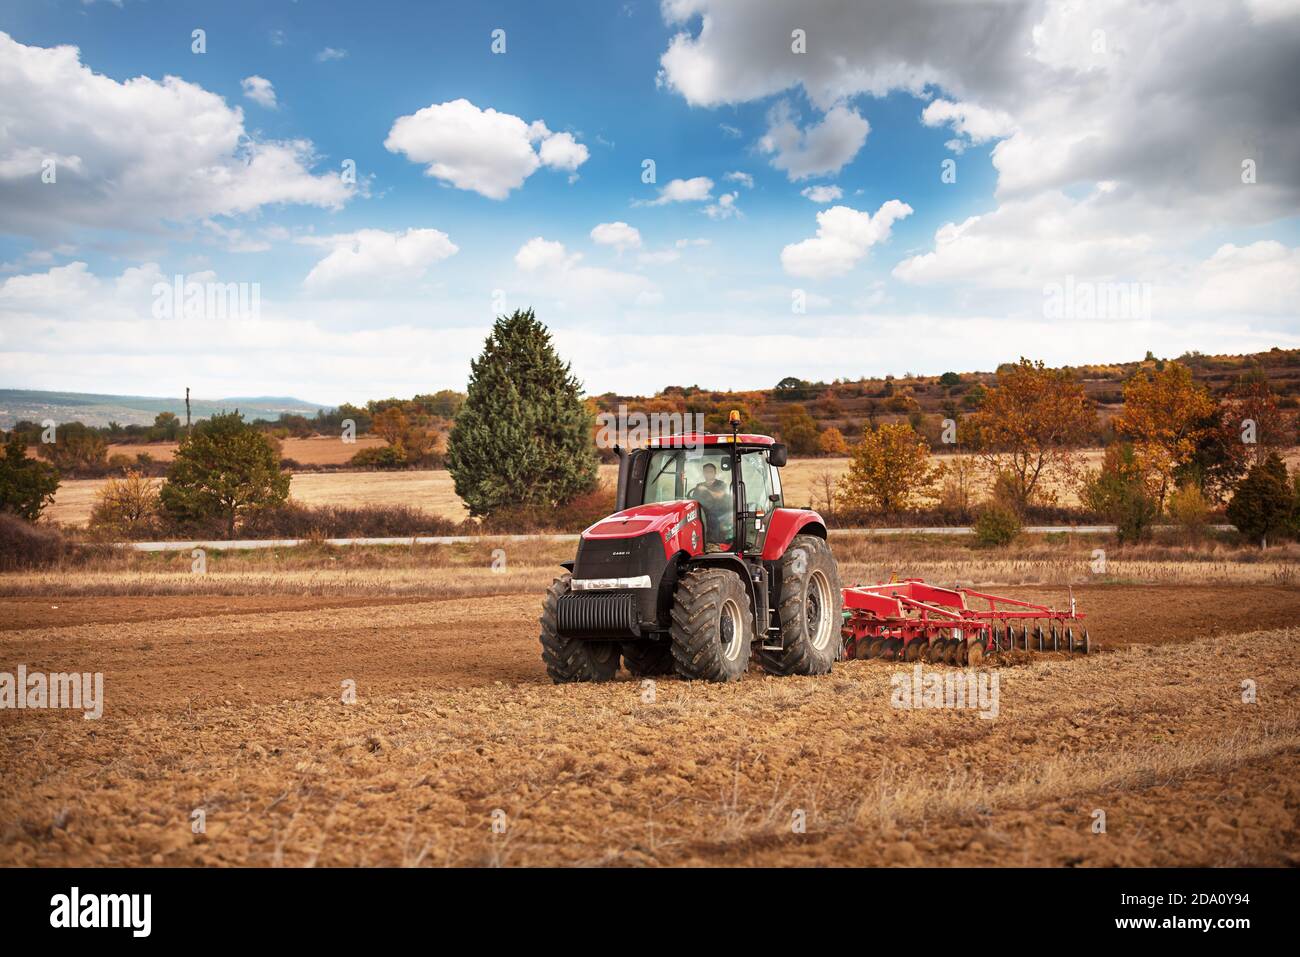 Karlovo, Bulgaria - Octomber 21, 2016: Case IH Puma 1260 agricultural tractor on display. Case IH wins two gold medals at AGROTECH - the 20th Internat Stock Photo